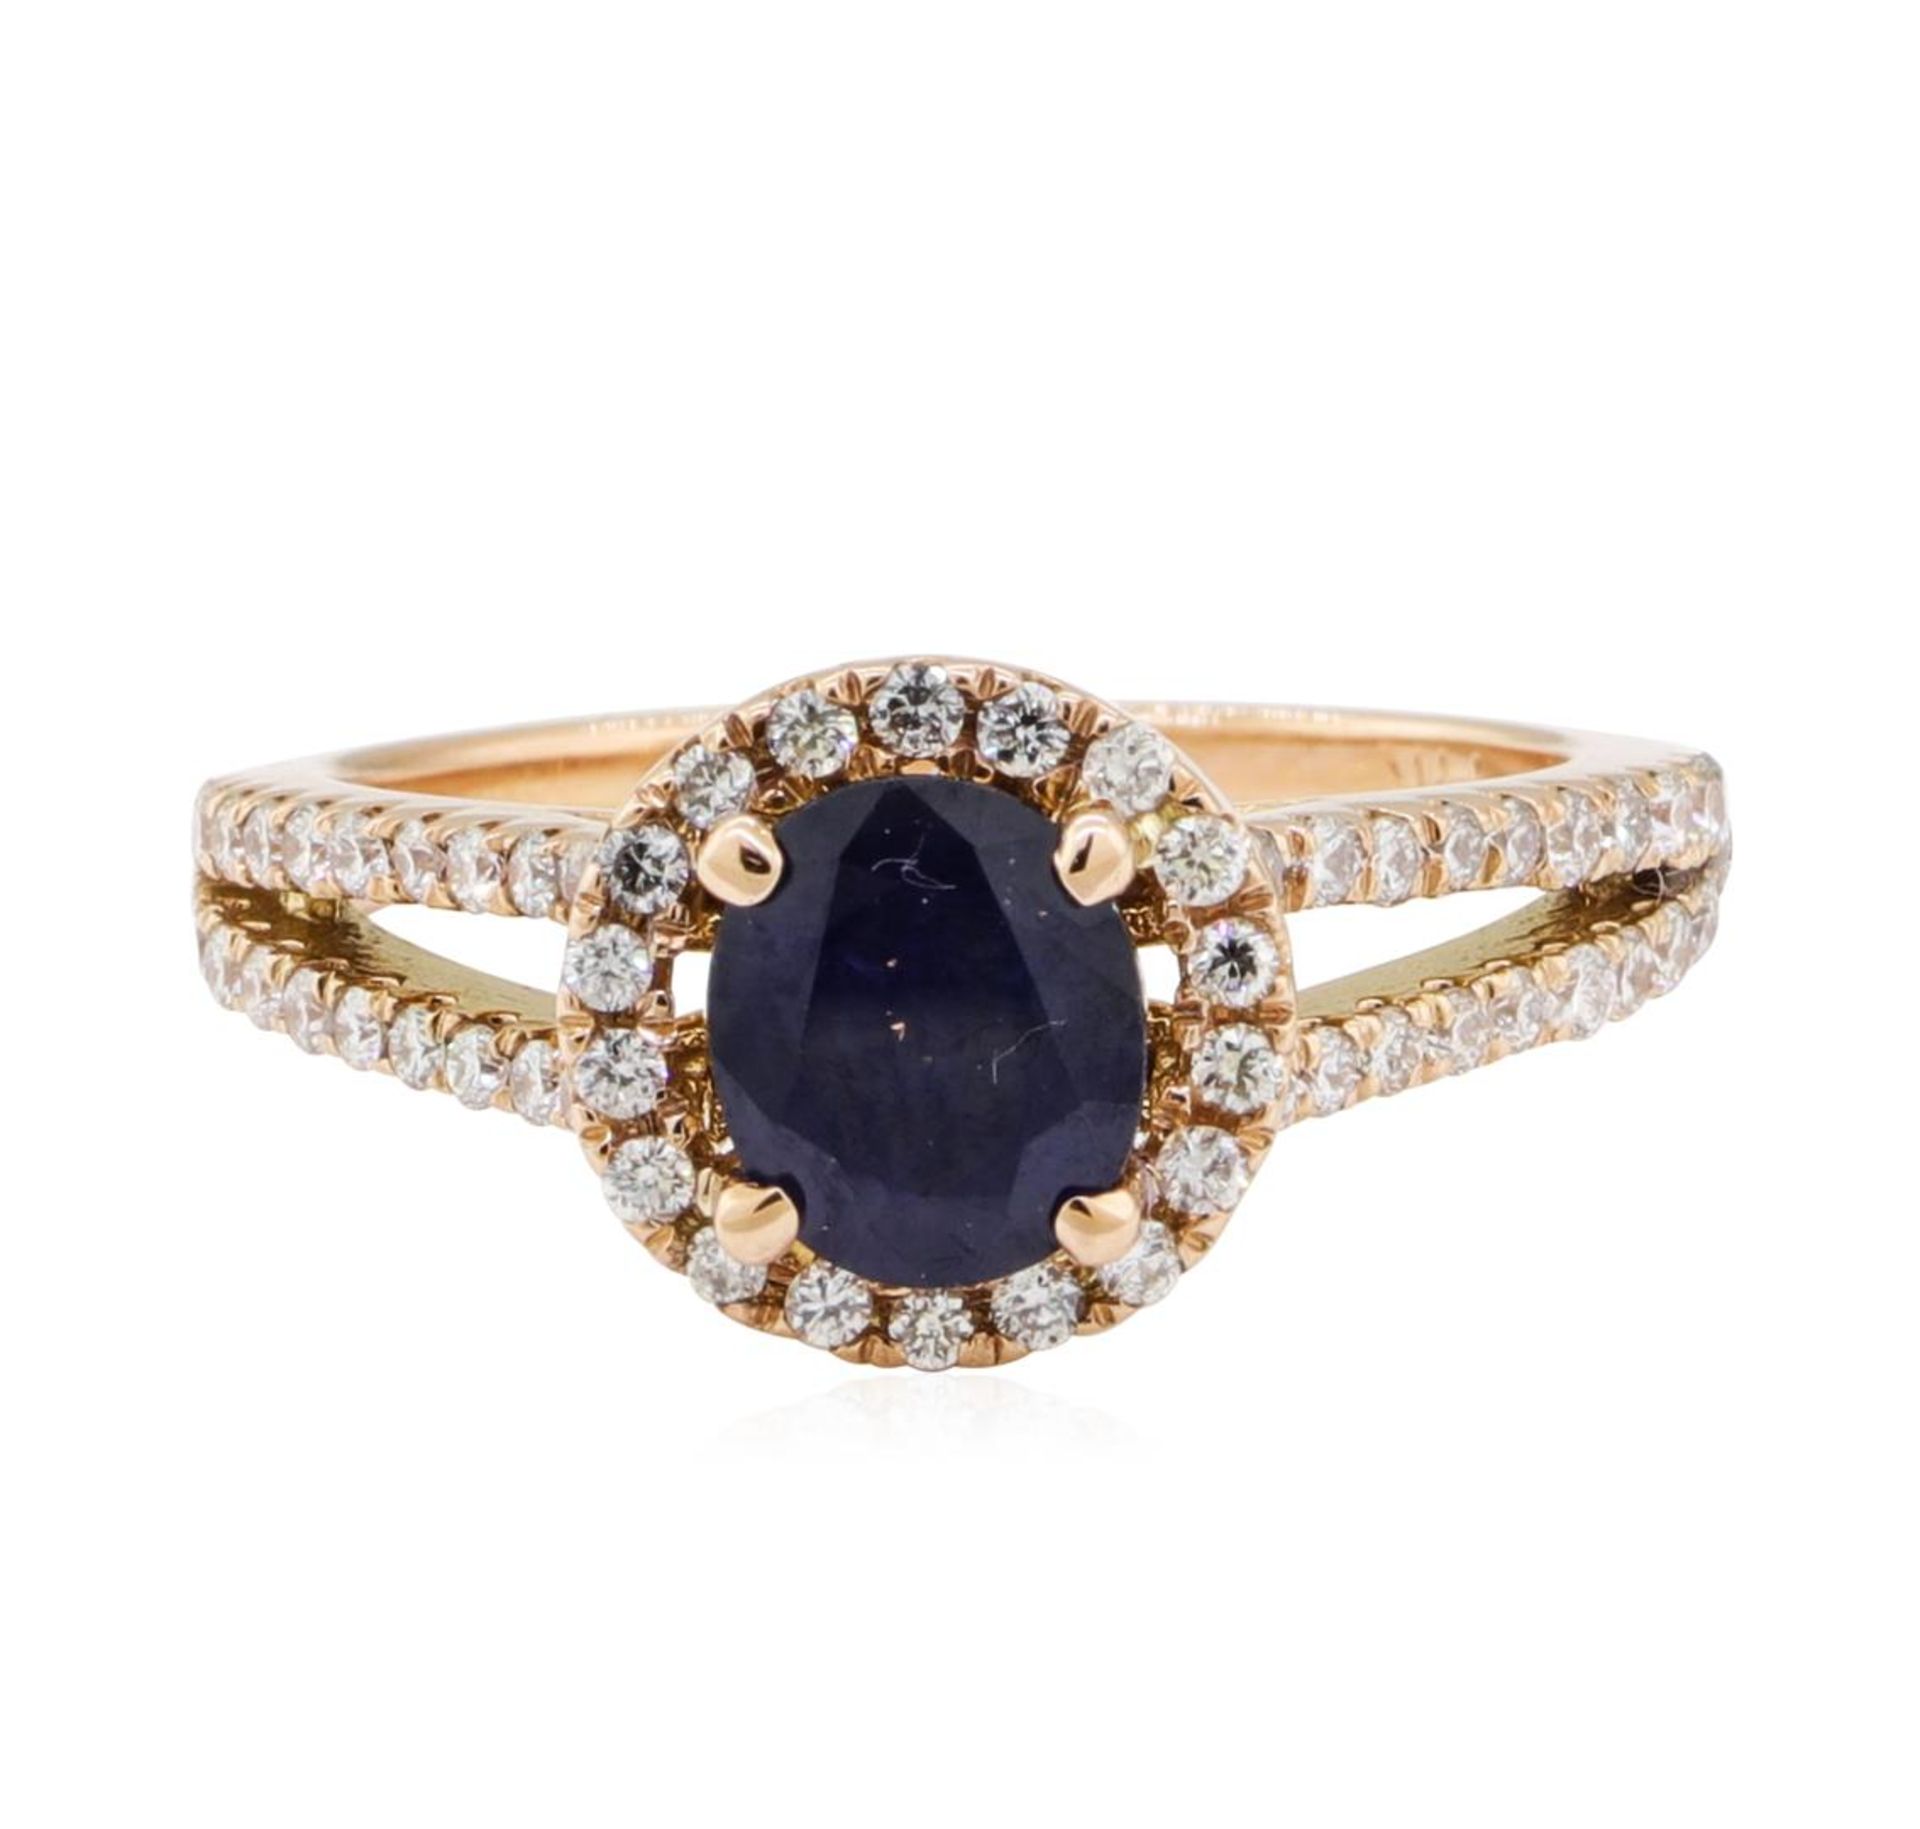 1.69 ctw Sapphire and Diamond Ring - 14KT Rose Gold - Image 2 of 5